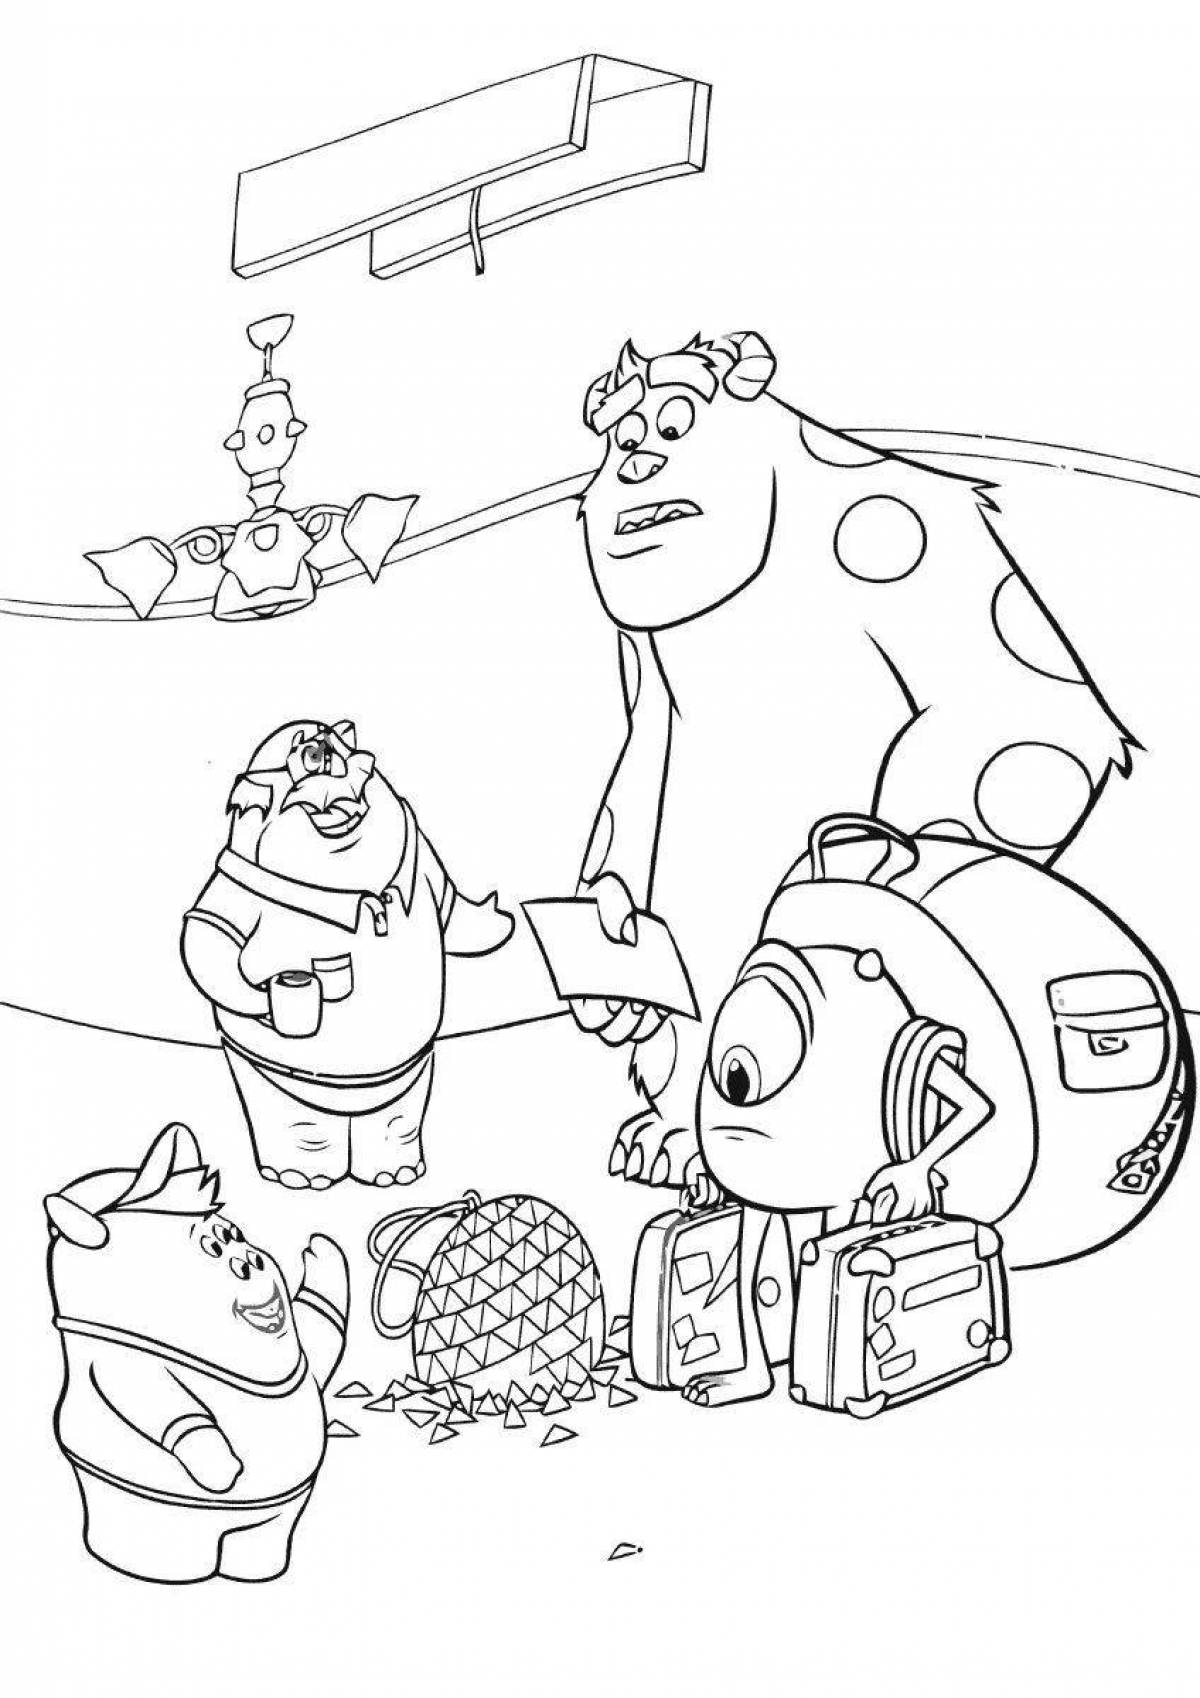 Monster Charming University coloring page